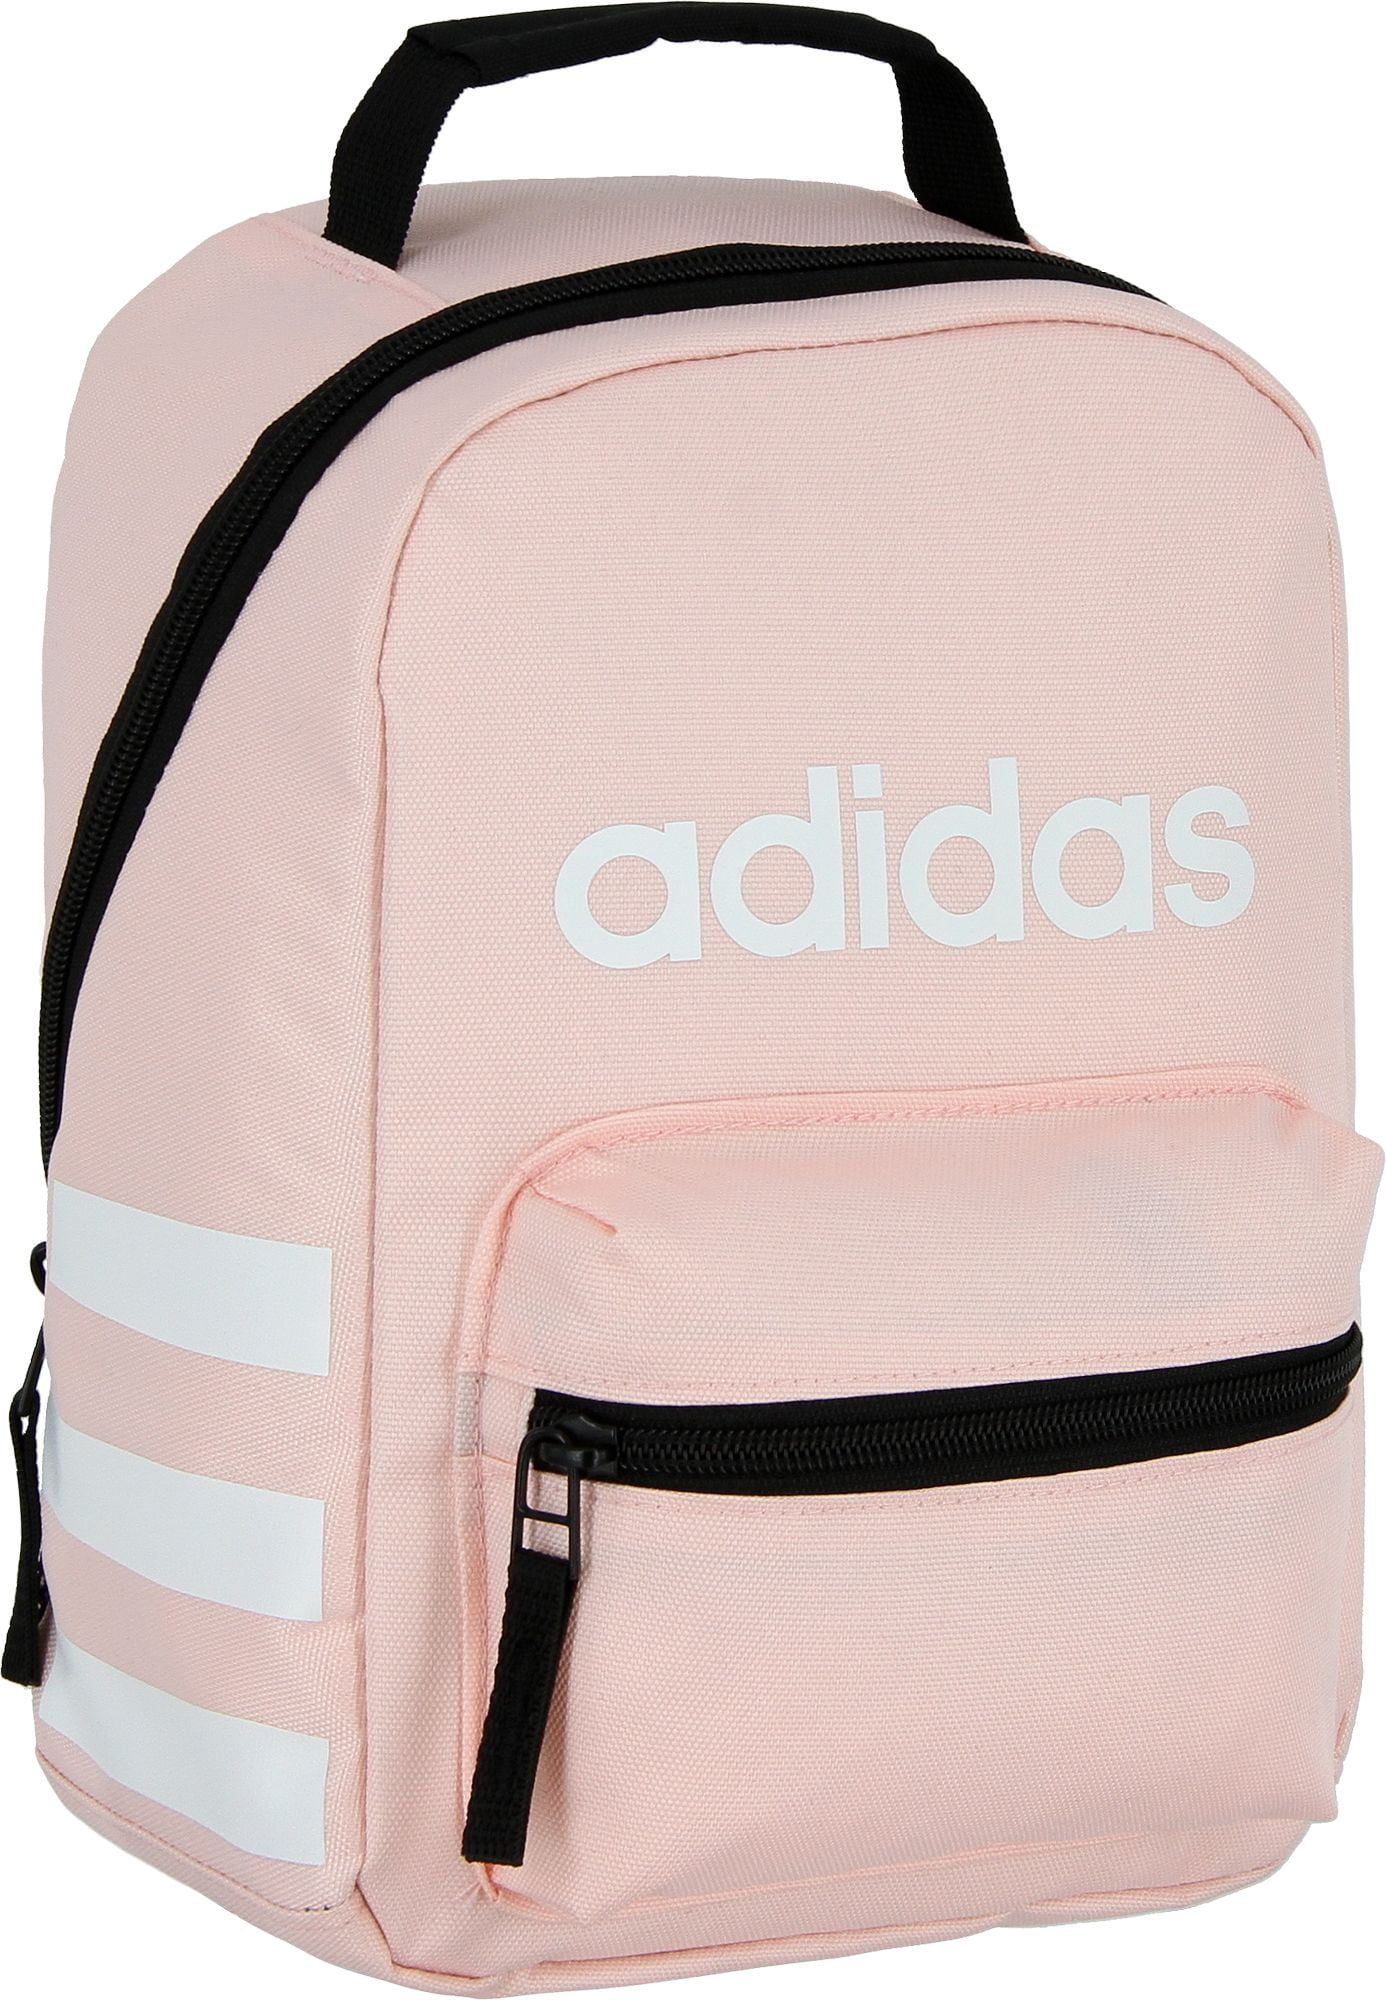 adidas lunch kit